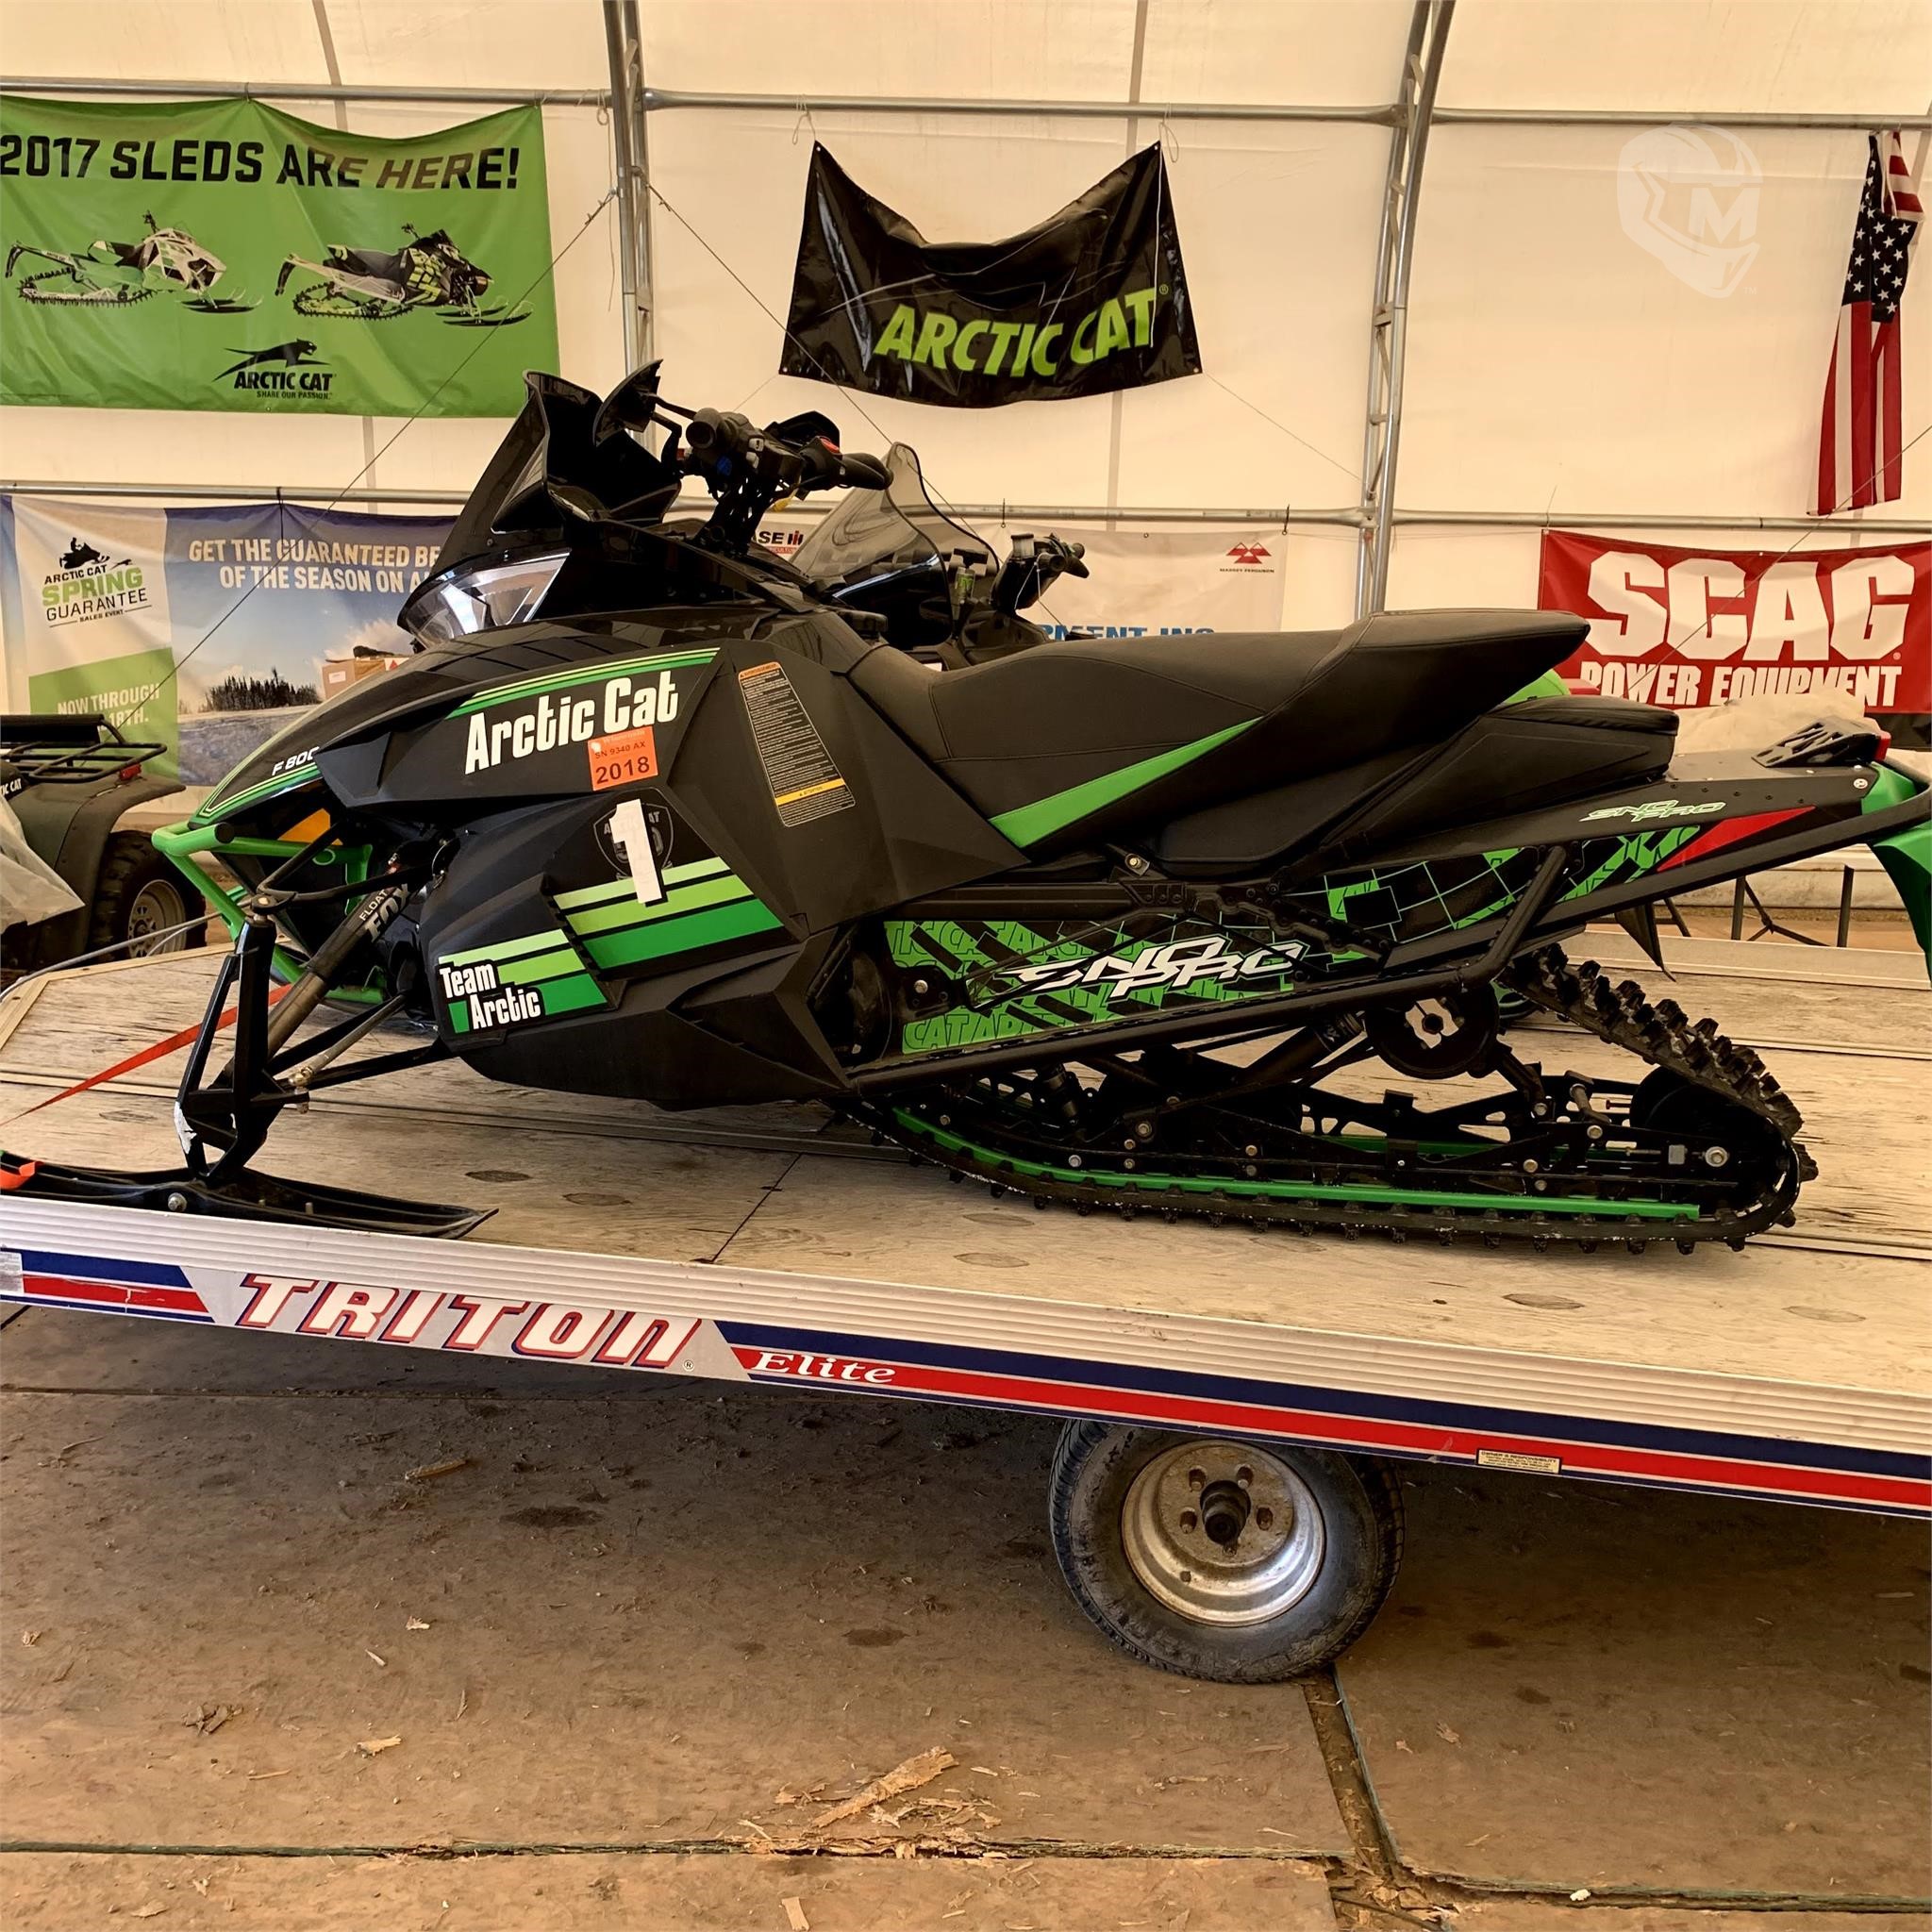 2012 ARCTIC CAT F 800 SNO PRO For Sale in Reedsburg, Wisconsin